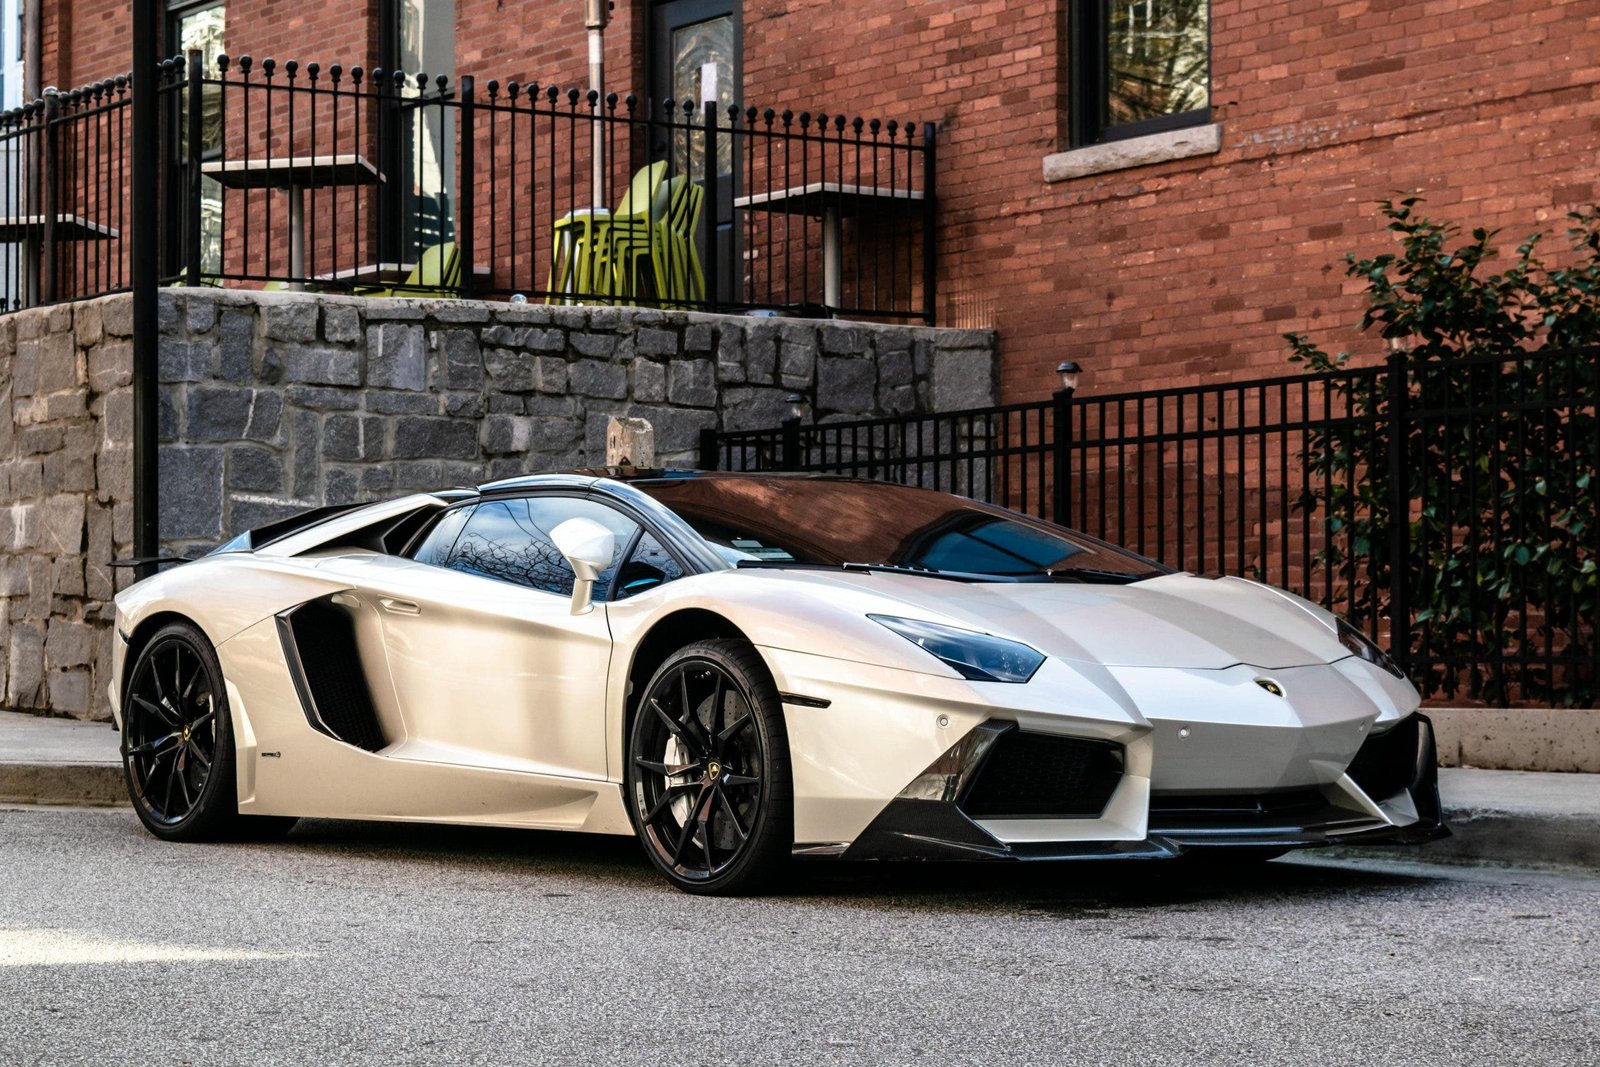 What to Consider Before Renting a Lamborghini For a Day